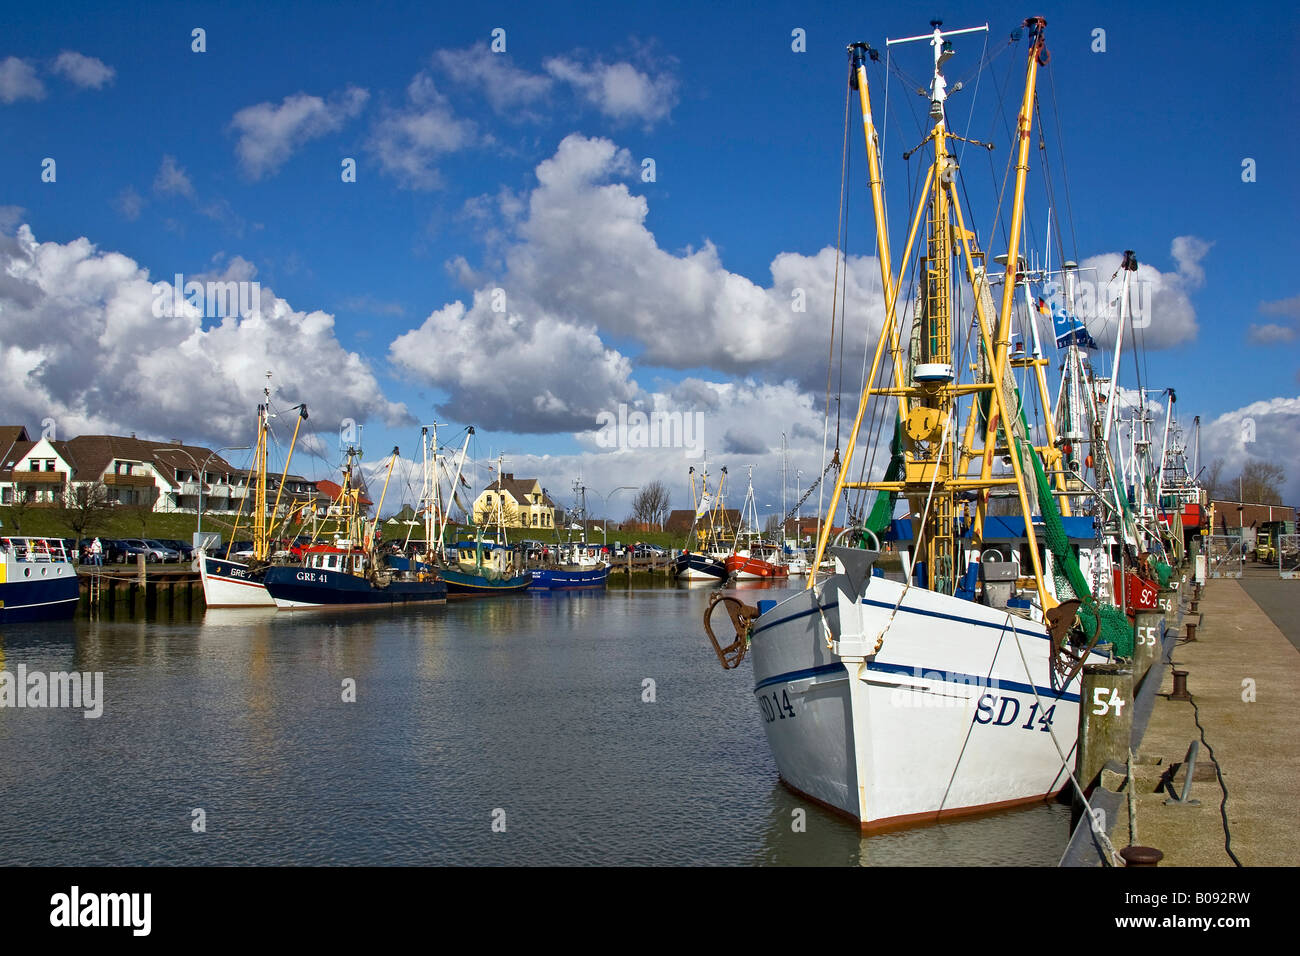 Fishing cutters in the harbour of the North Sea resort town of Buesum, Dithmarschen, Schleswig-Holstein, Wattenmeer, Germany Stock Photo